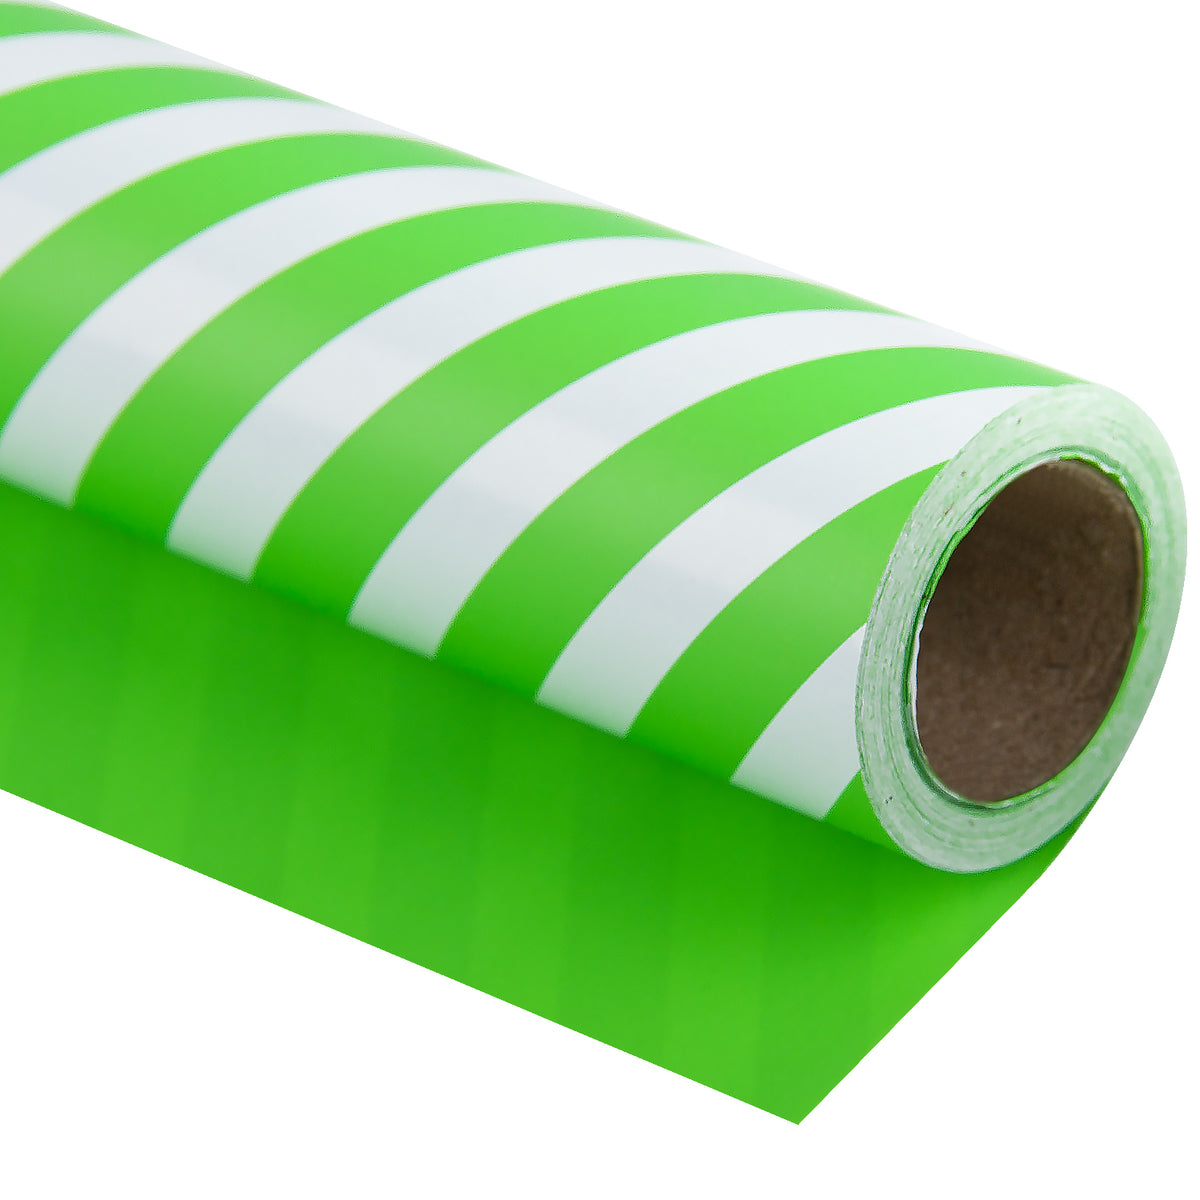 WRAPAHOLIC Wrapping Paper Roll - Reversible Green and Black for Birthday,  Holiday, Wedding, Baby Shower Wrap - 30 inch x 16.5 feet